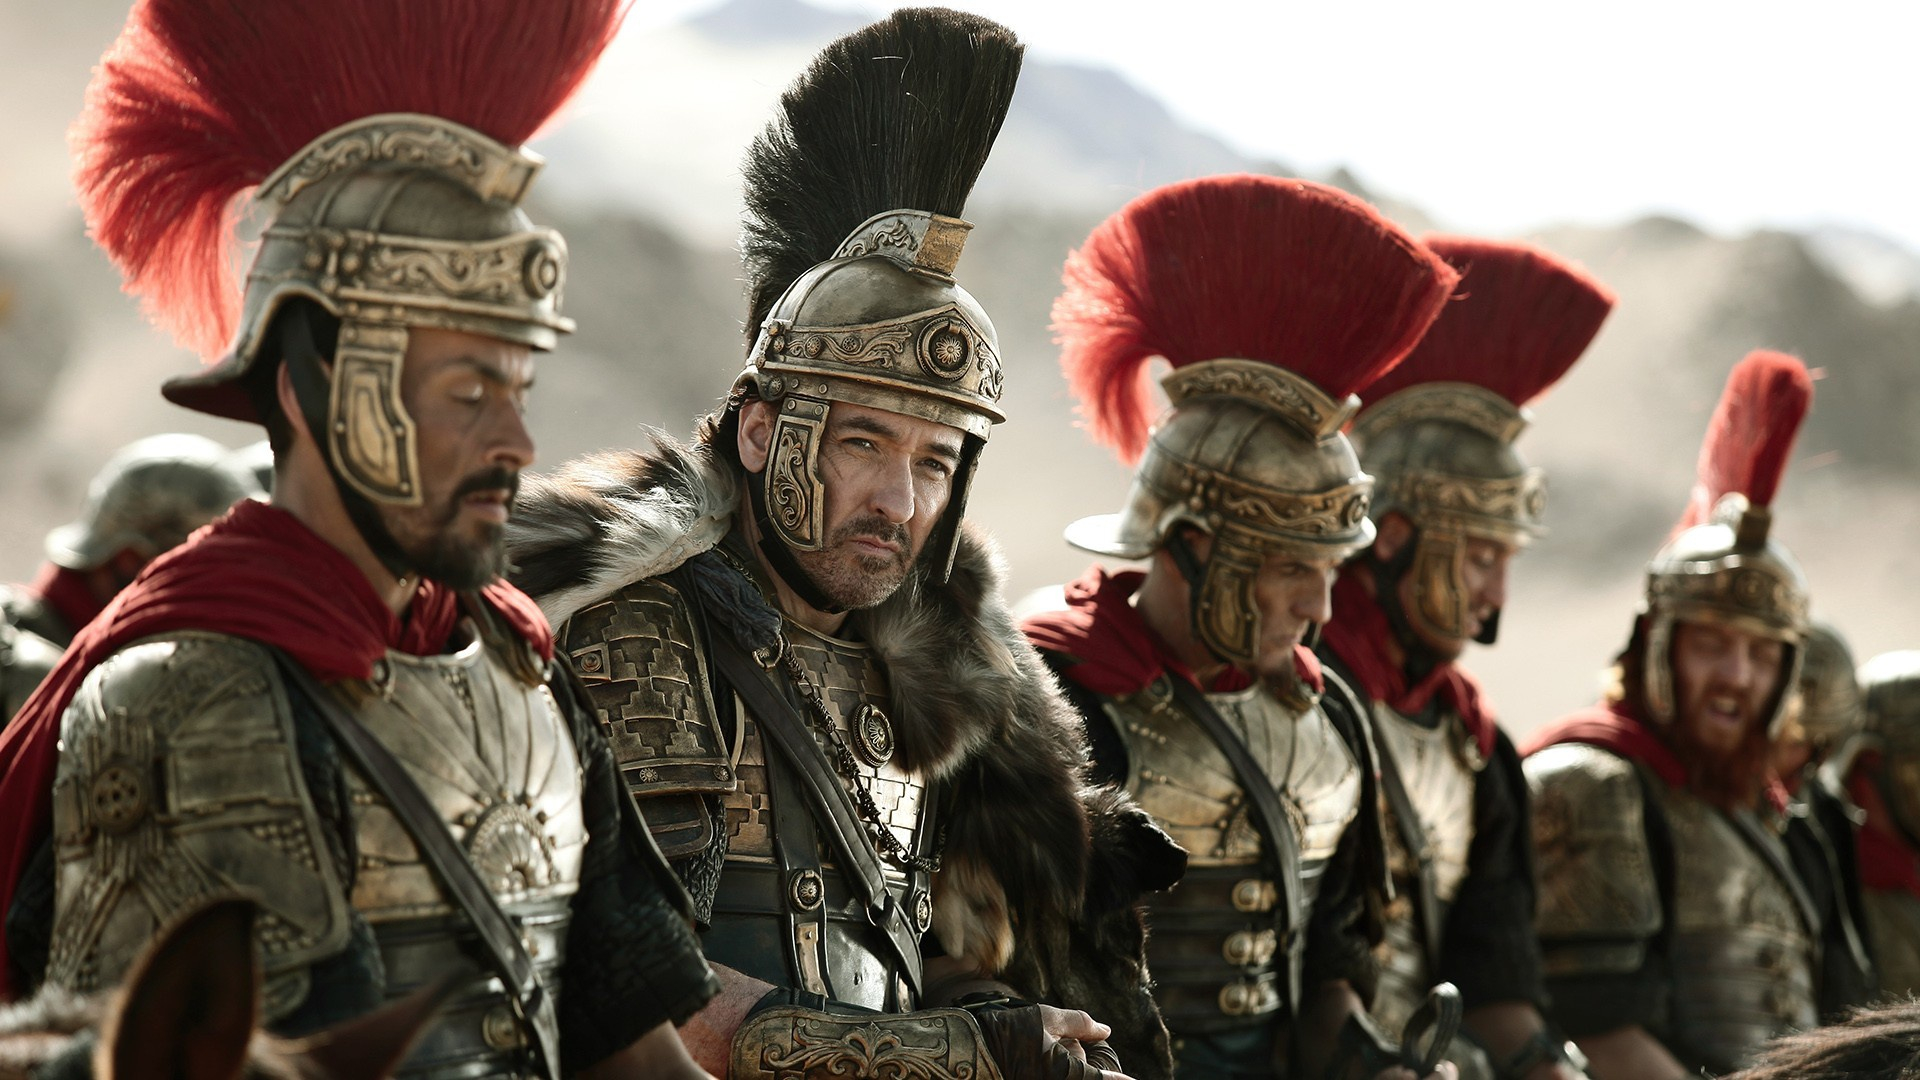 1920x1080 Download wallpaper cinema, soldier, armor, army, movie, horse, film, warrior, pearls, Roman, Adrien Brody, centurion, Tian jiang xiong shi, Dragon Blade, John Cusack, Lucius, section films in resoluti